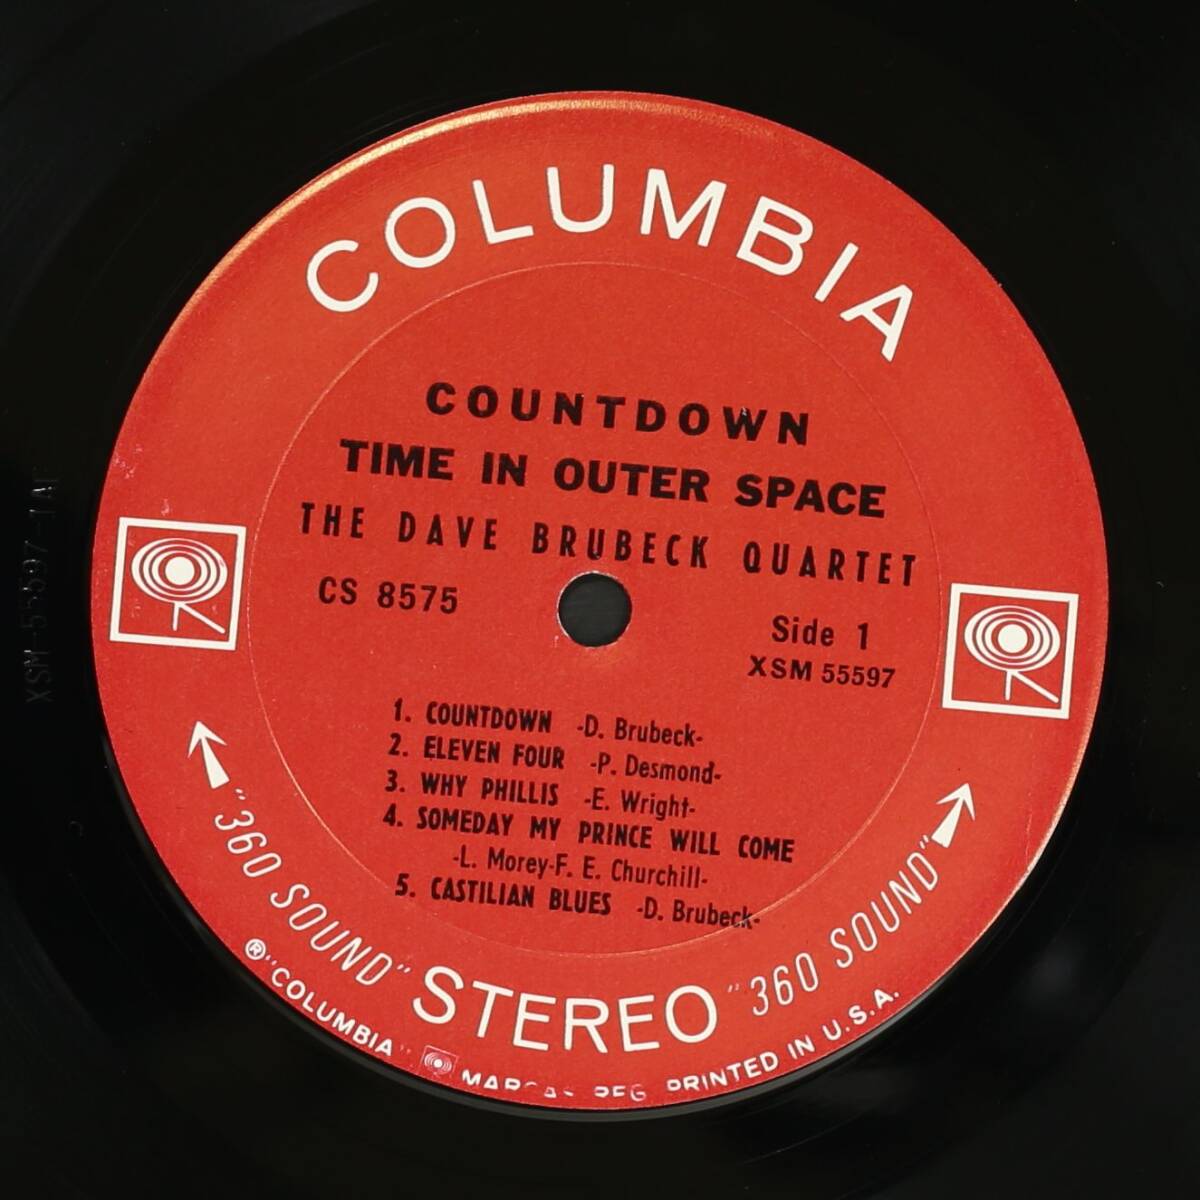 【US盤LP】Dave Brubeck Quartet/Countdown: Time In Outer Space(並下品,良盤,STEREO,1962)の画像3